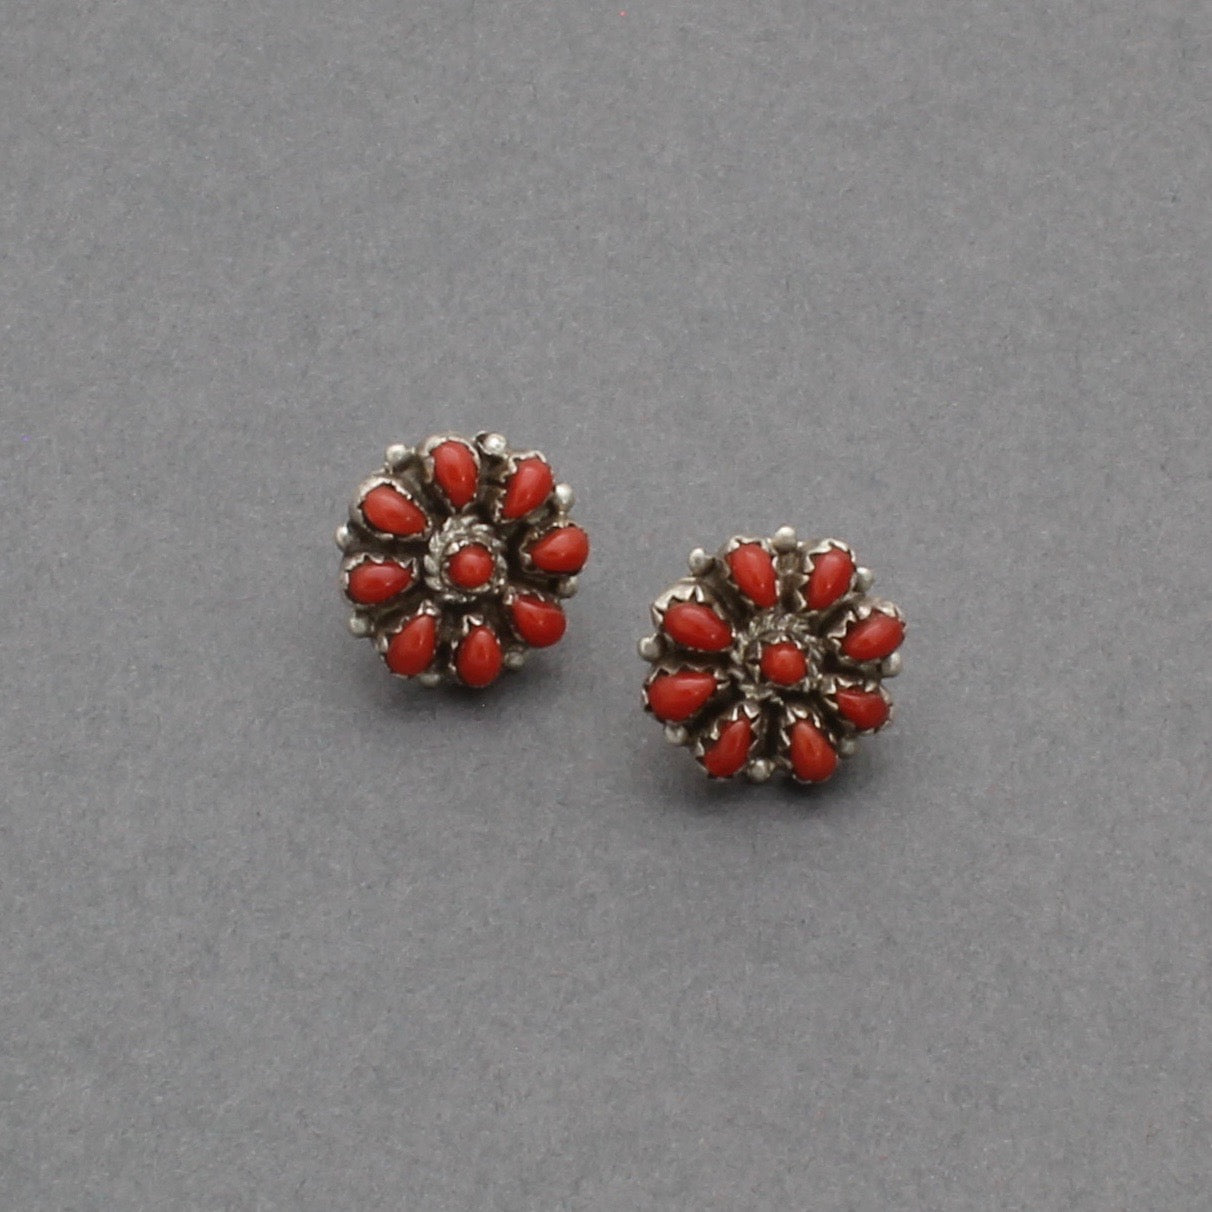 Vintage Zuni Earrings of Coral Petit Point Clusters - Turquoise & Tufa